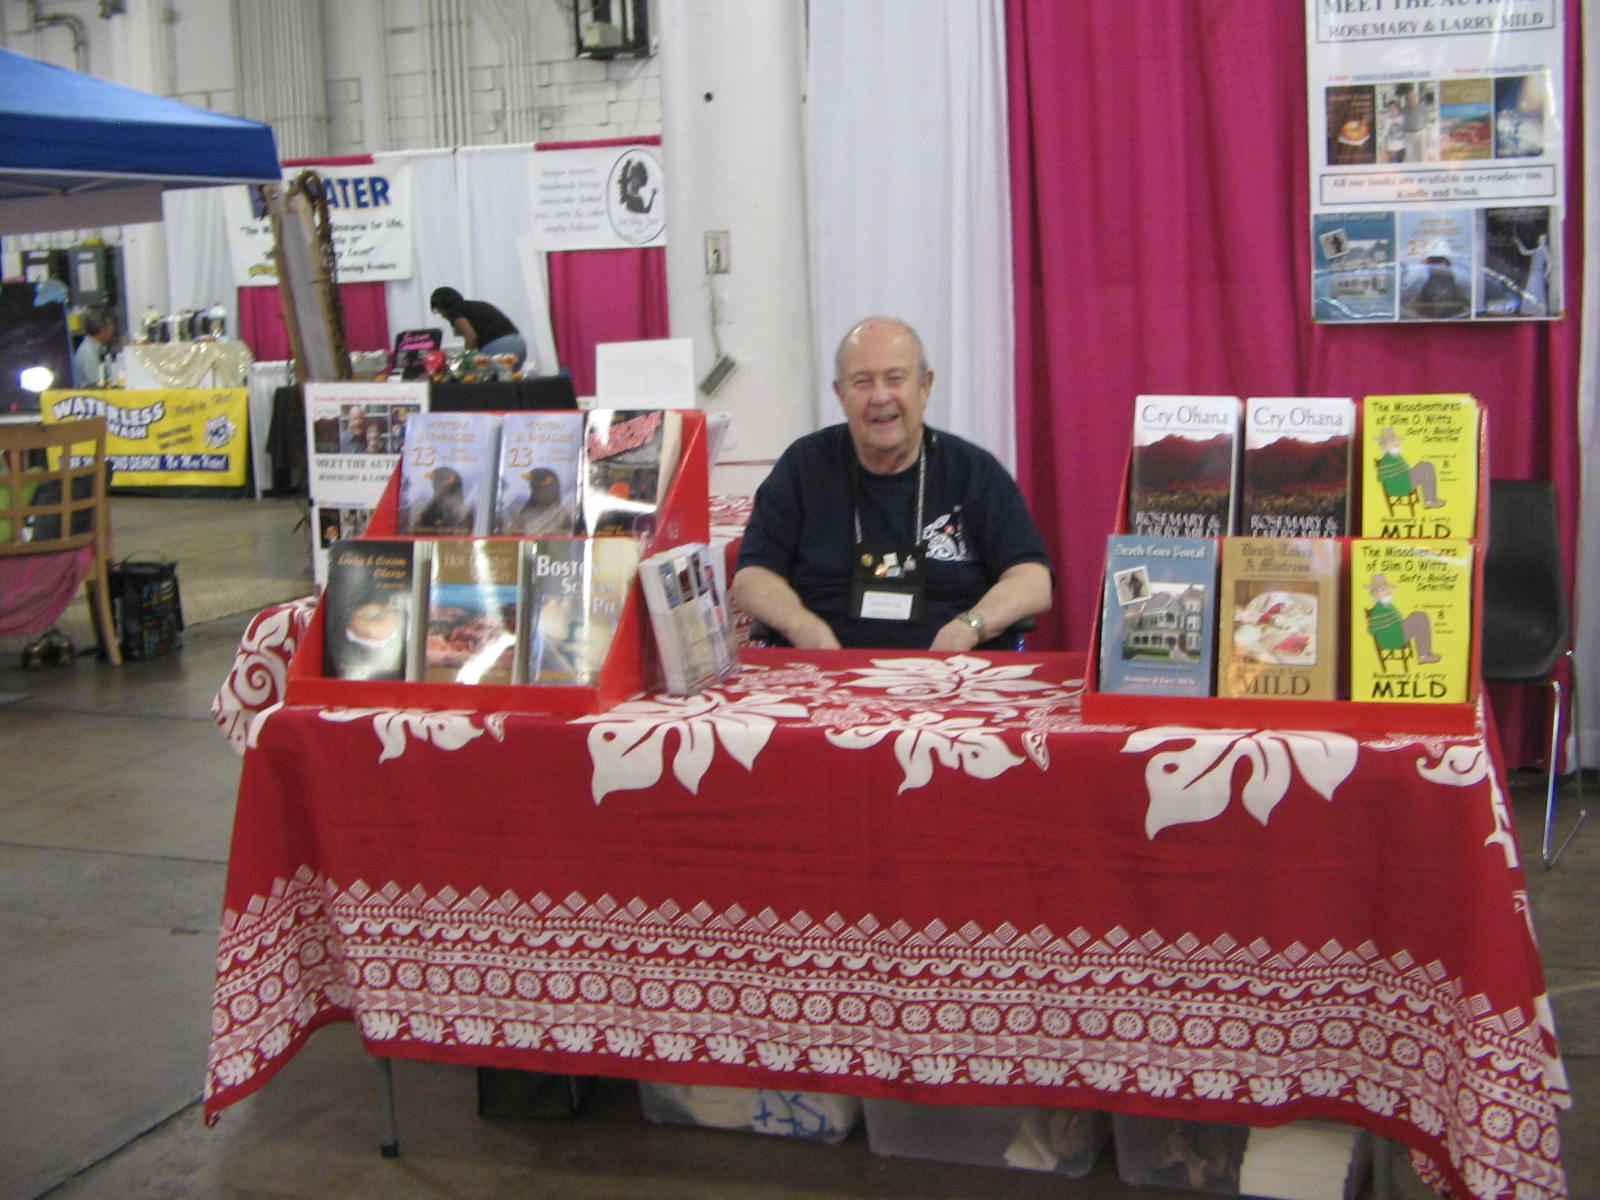 Signing at Blaisdale Exhibition Hall, Honolulu, Hawaii